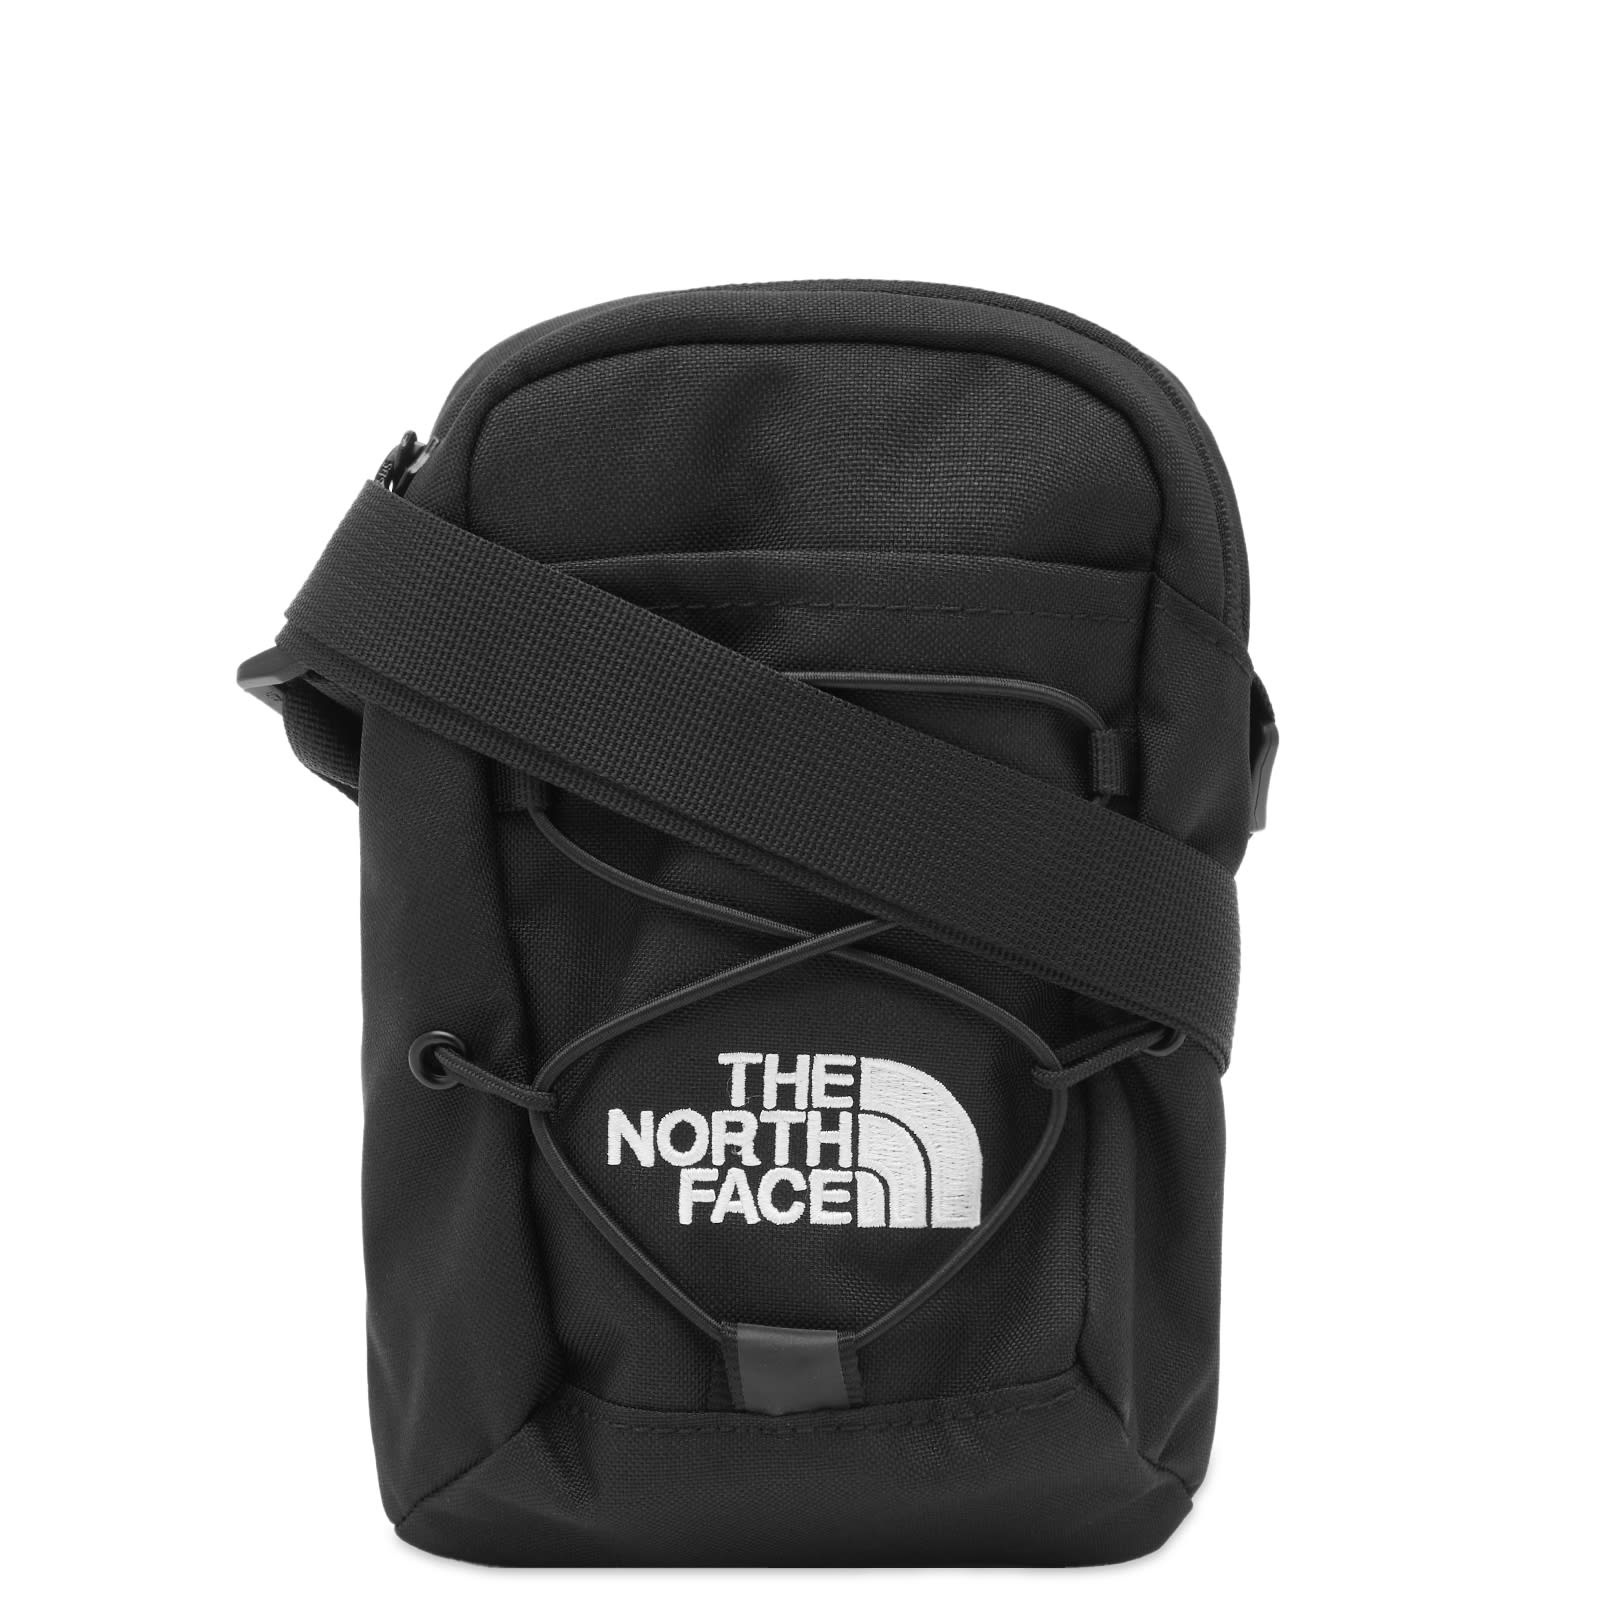 The North Face Jester Crossbody Bag - 1